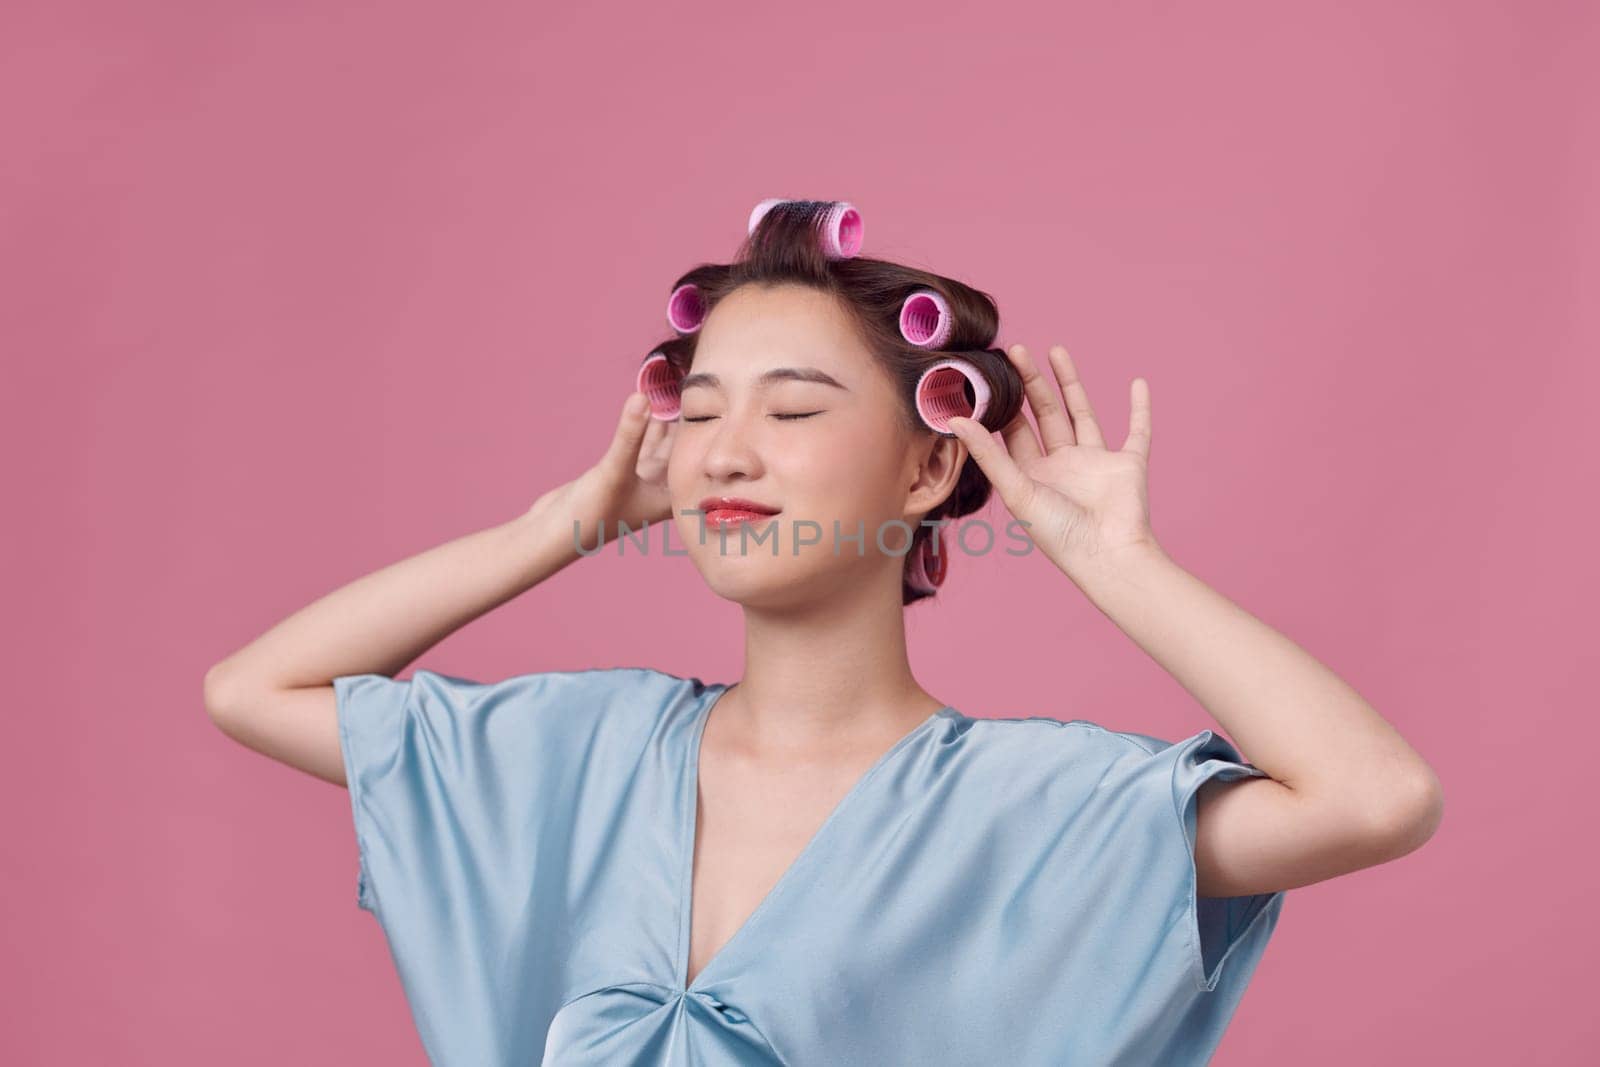 young beautiful girl having hair curlers on her head isolated on pink background